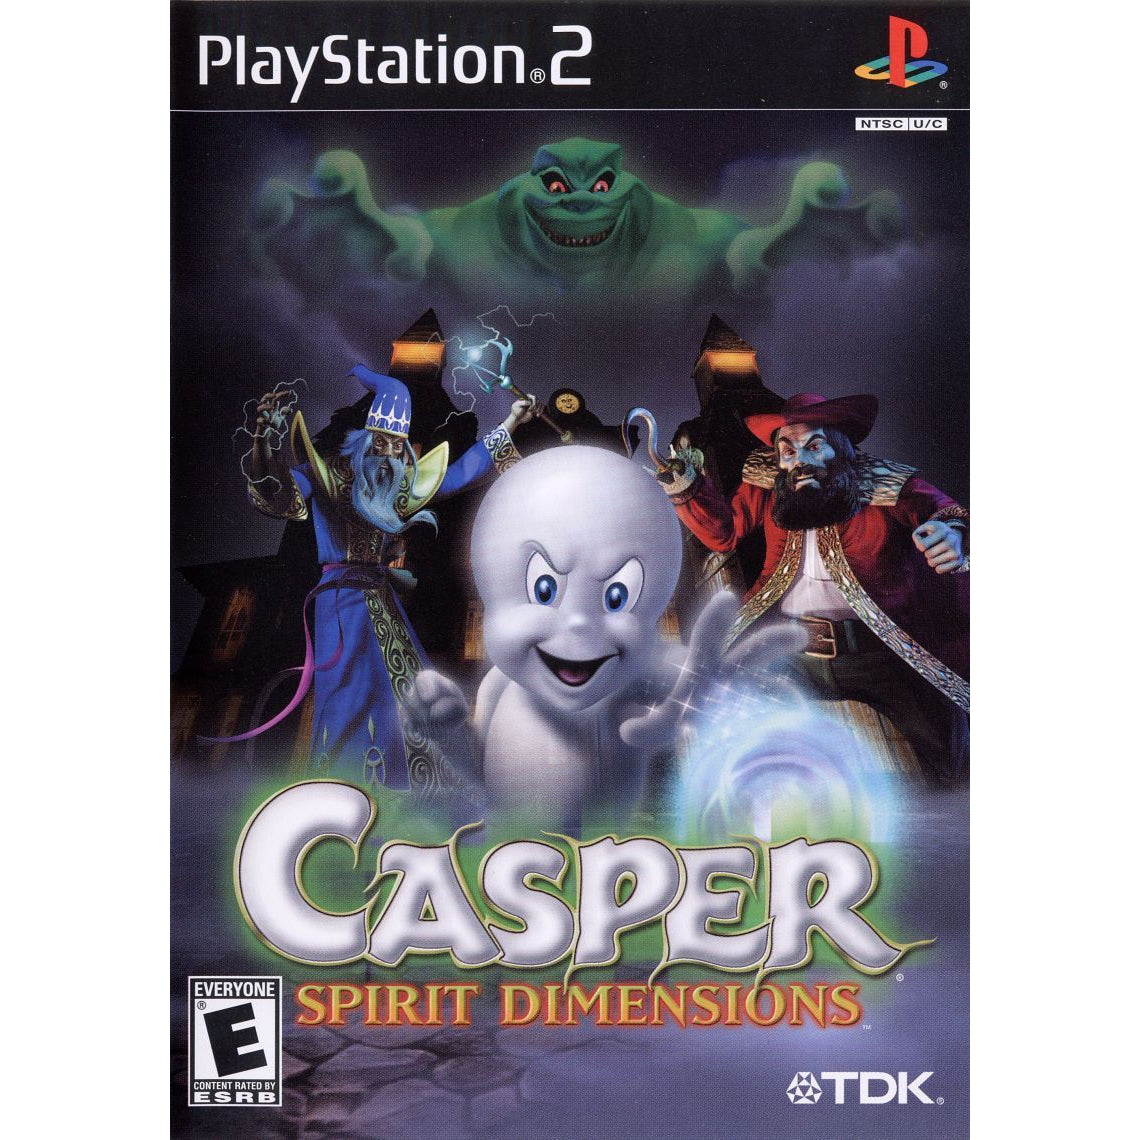 Casper: Spirit Dimensions - PlayStation 2 (PS2) Game Complete - YourGamingShop.com - Buy, Sell, Trade Video Games Online. 120 Day Warranty. Satisfaction Guaranteed.